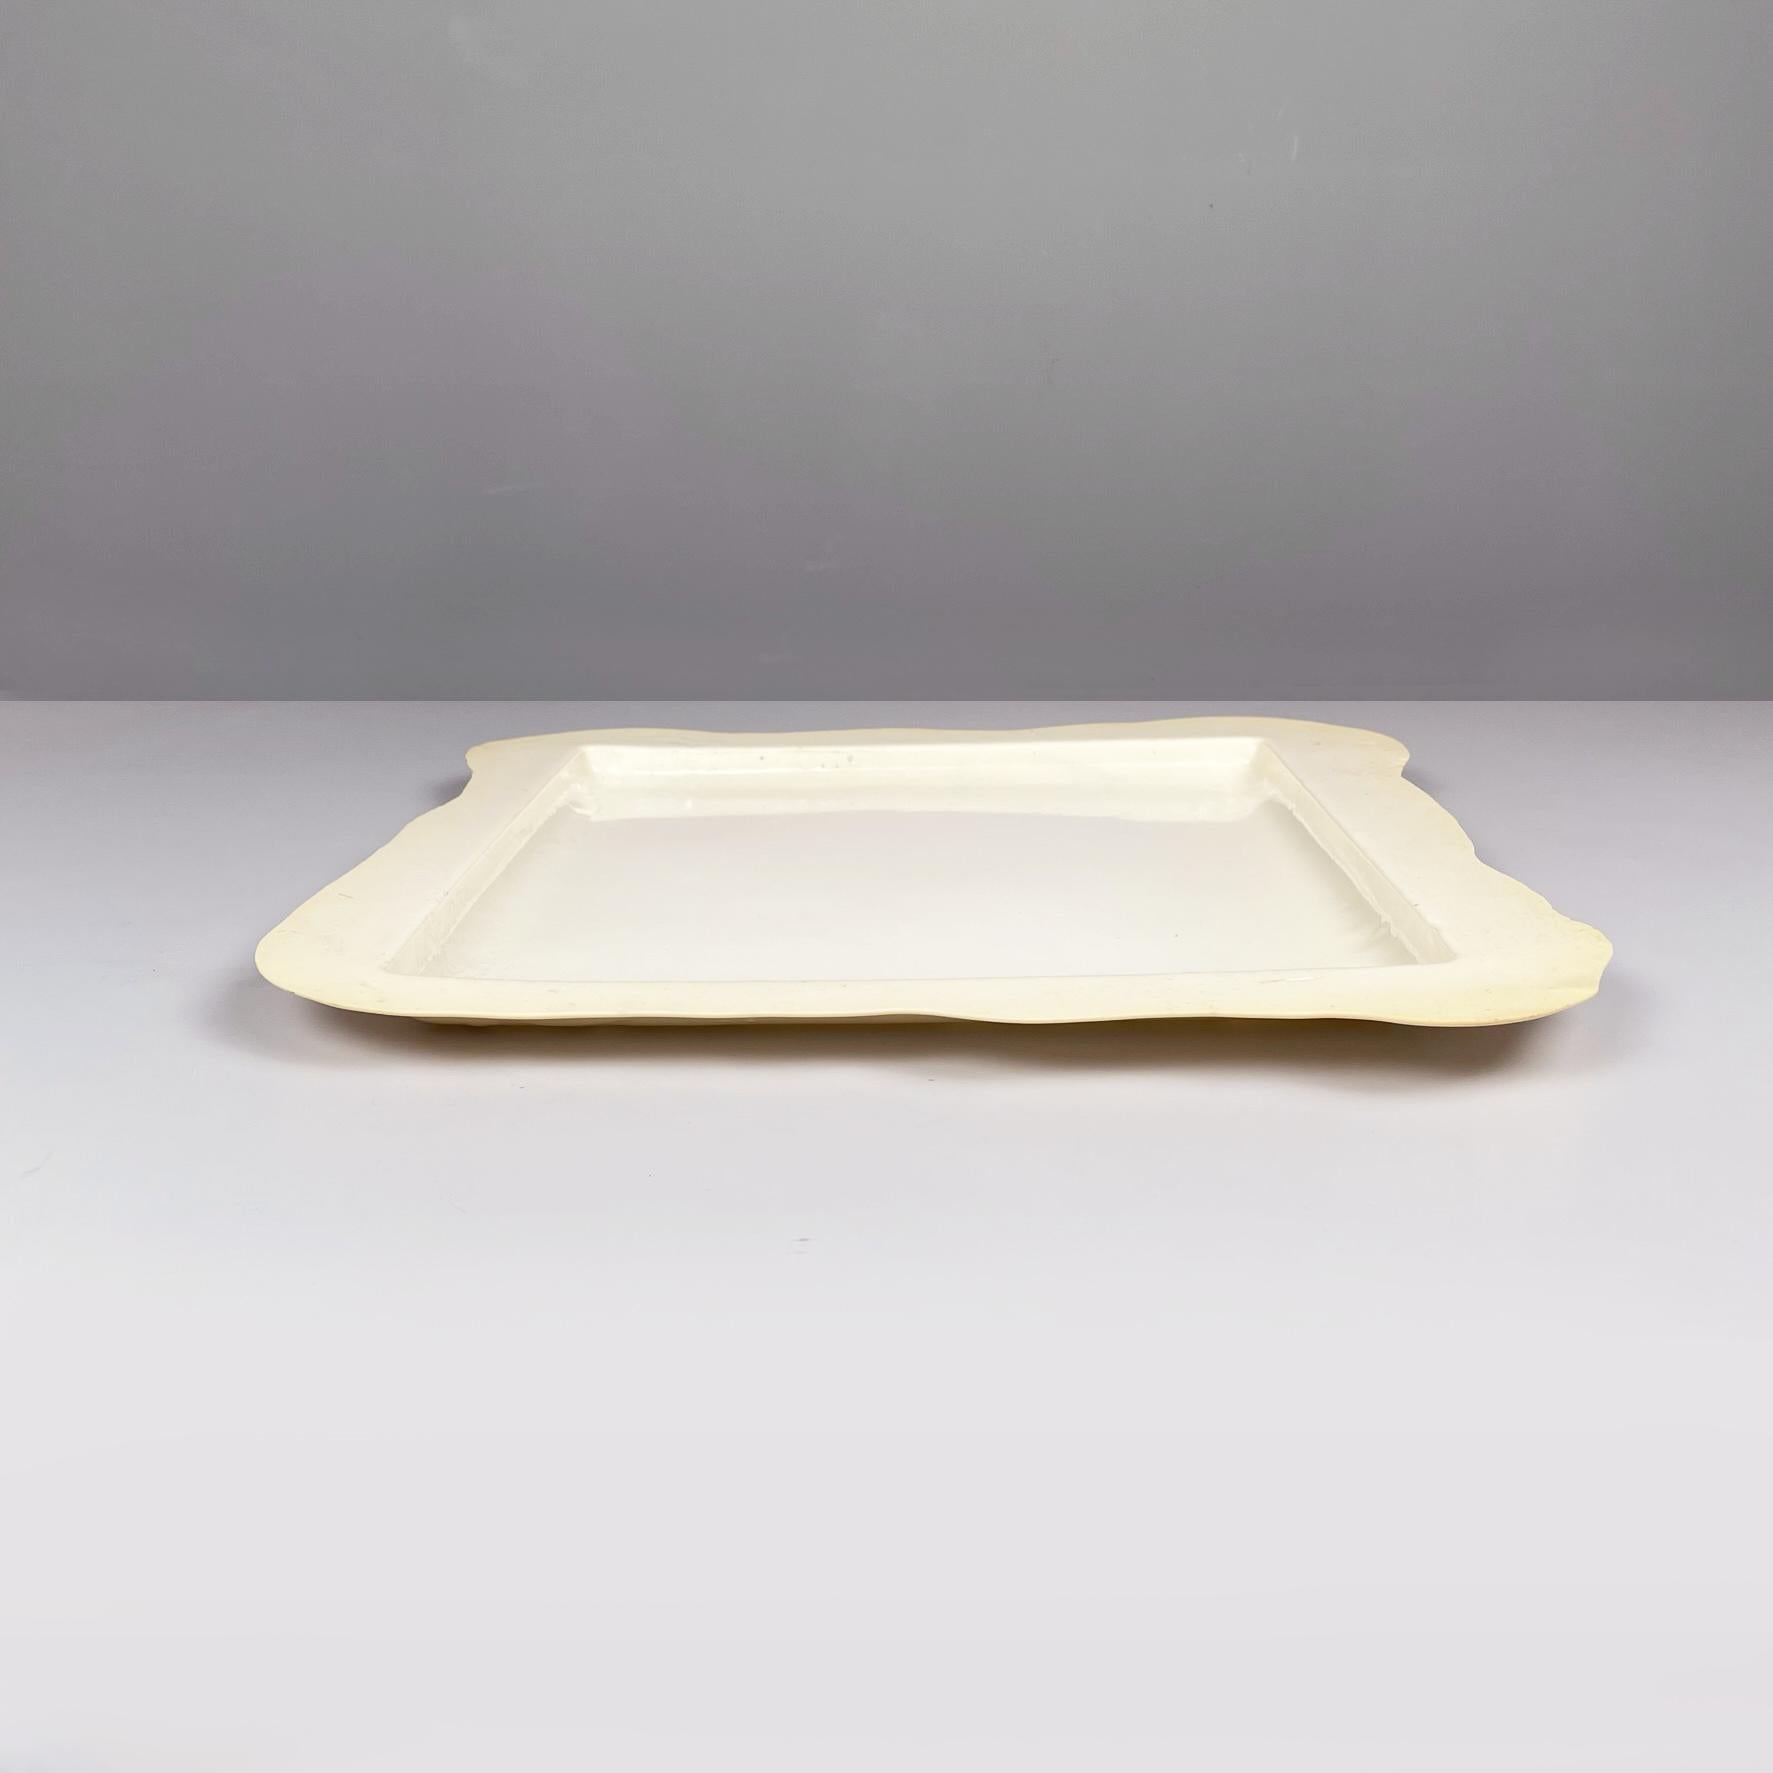 Italian post-modern White Resin try-tray by Gaetano Pesce for Fish Design, 2000s In Good Condition For Sale In MIlano, IT